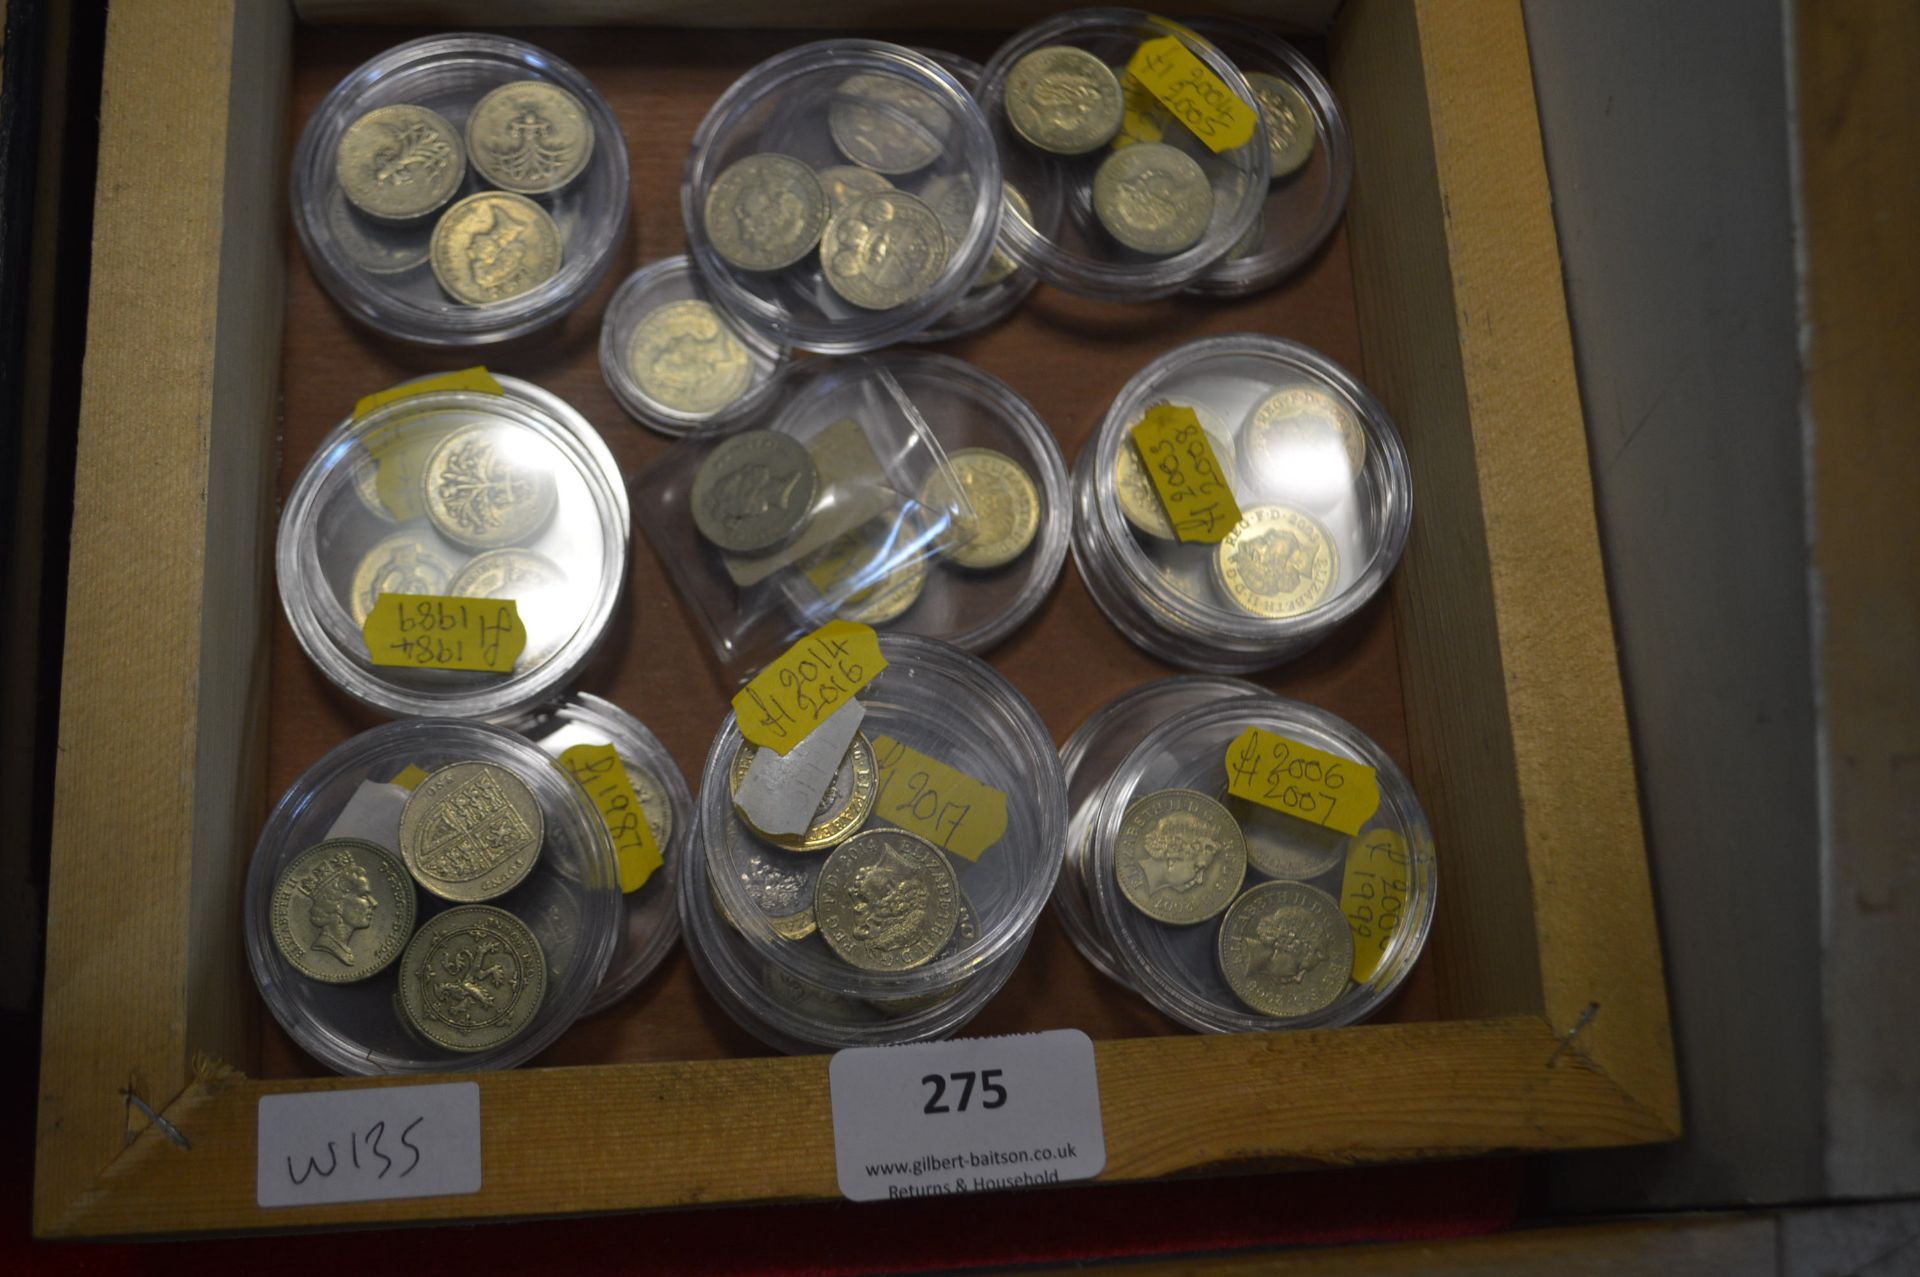 Collection of UK Current and Deleted £1 Coins